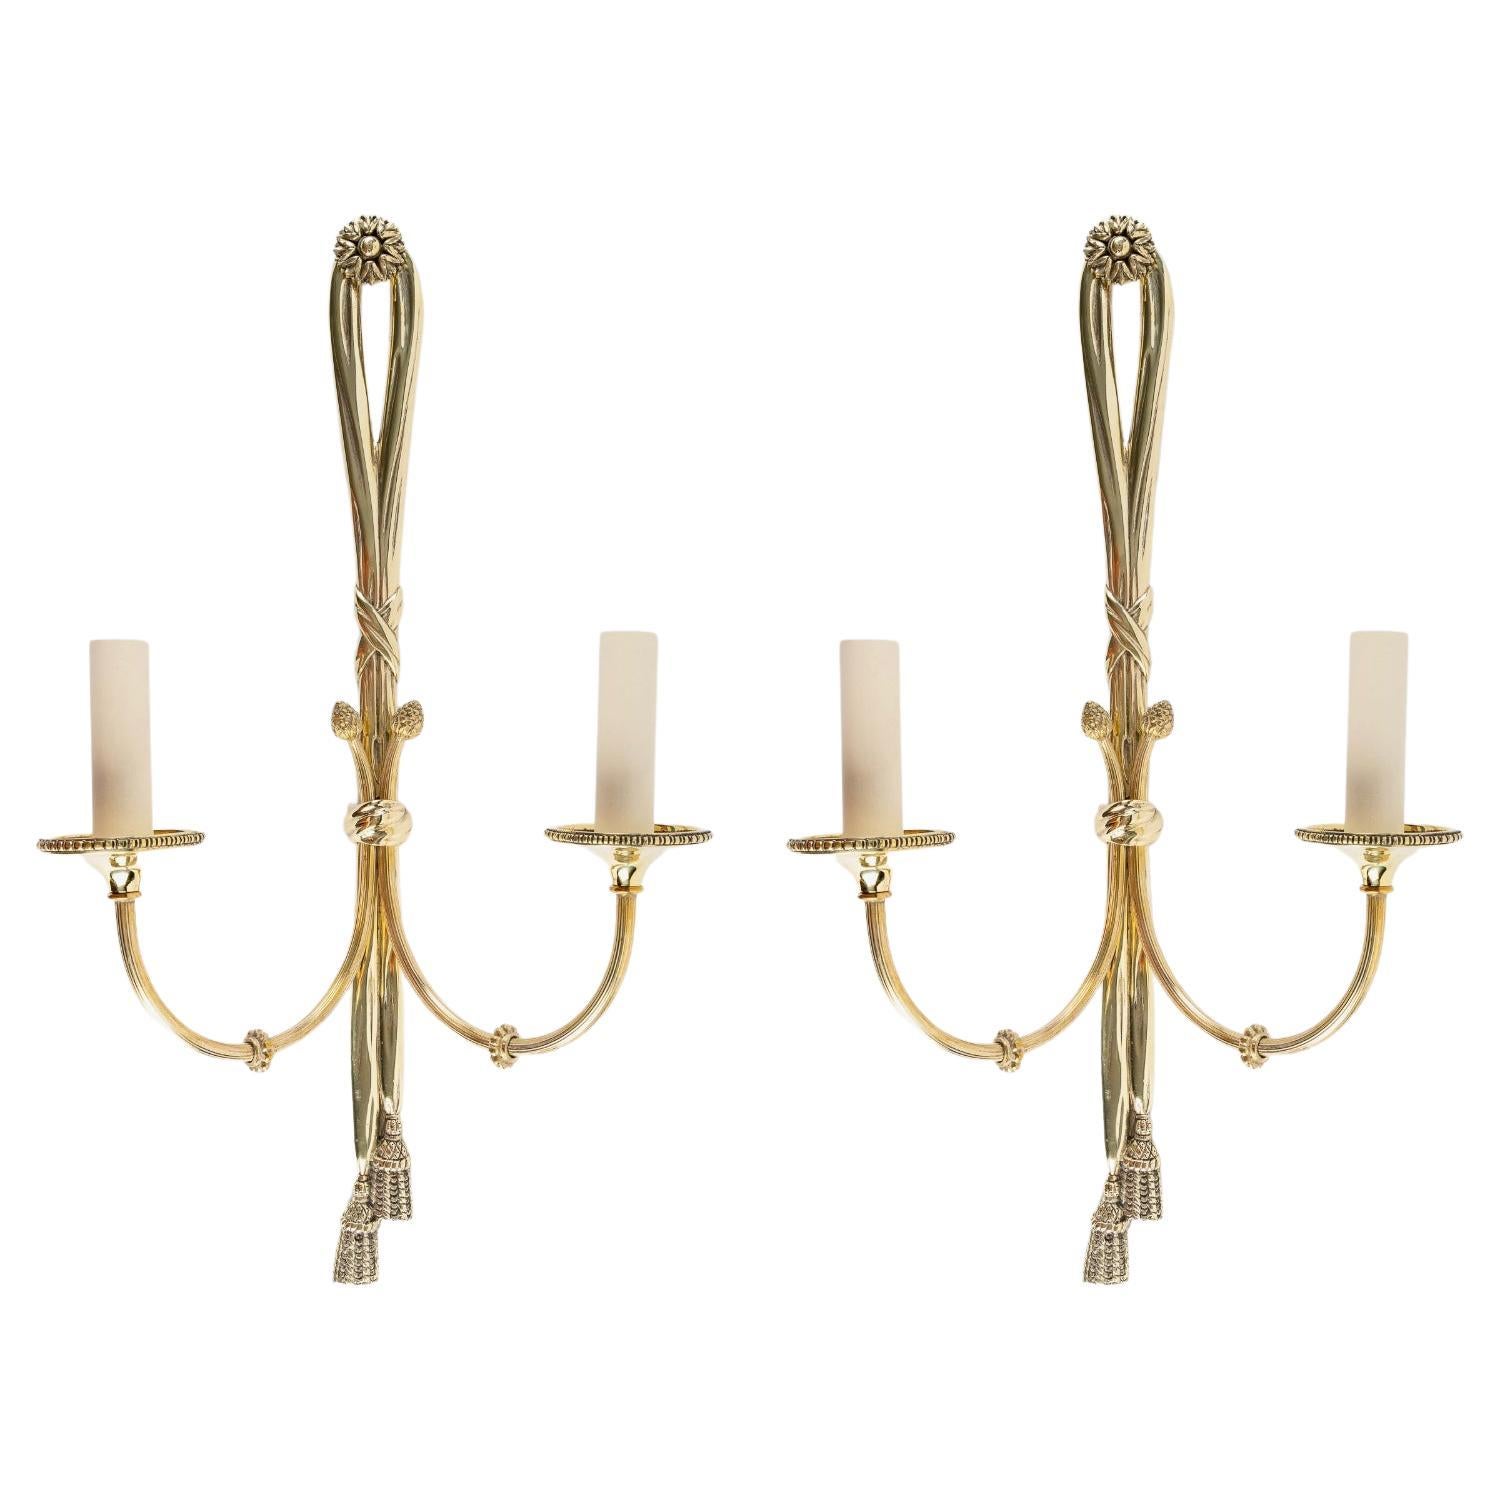 1950 Pair of Neoclassical Sconces in Bronze from the House of Lucien Gau For Sale